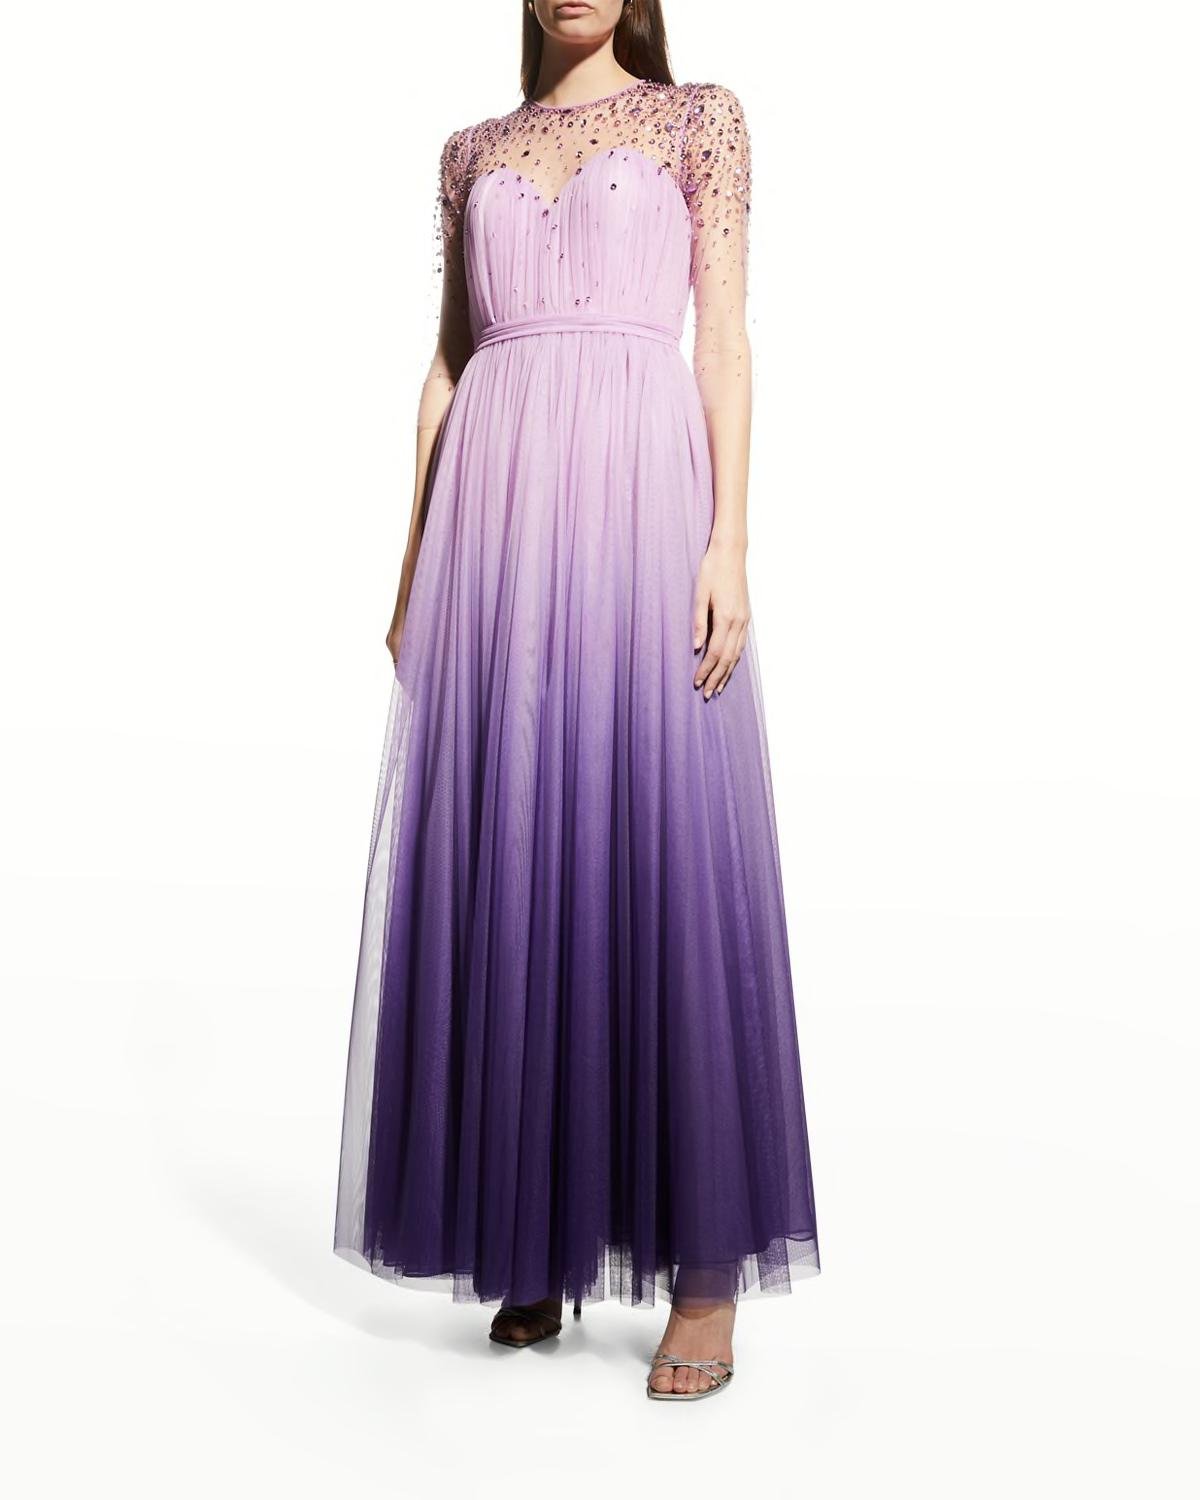 Crystal-Embellished Pleated Ombre Chiffon Illusion Gown by PAMELLA ROLAND